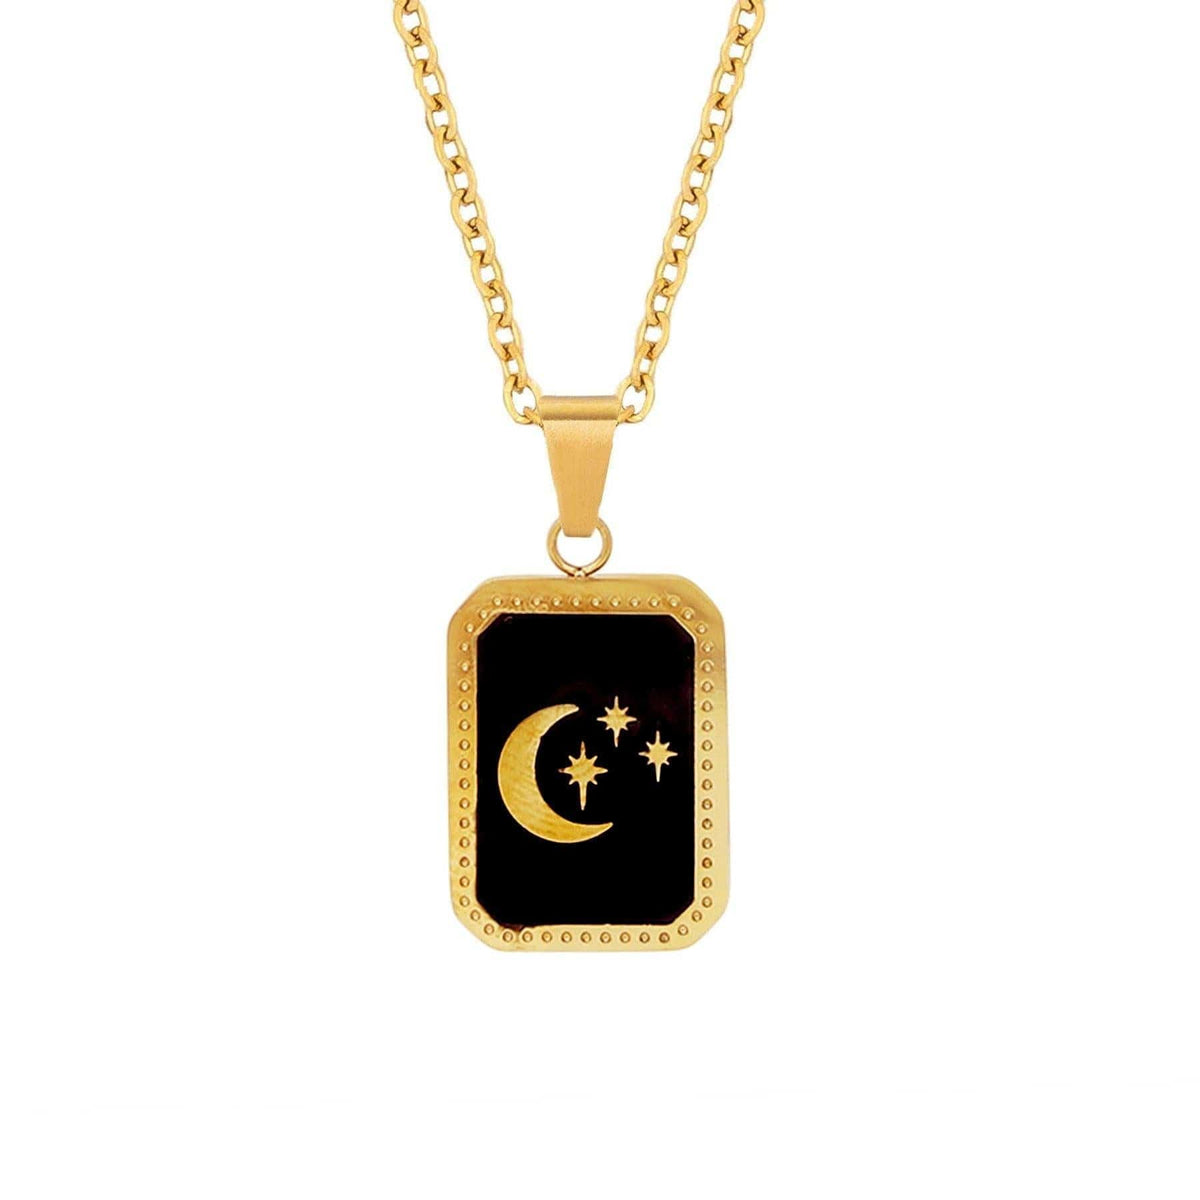 BohoMoon Stainless Steel Carli Necklace Gold